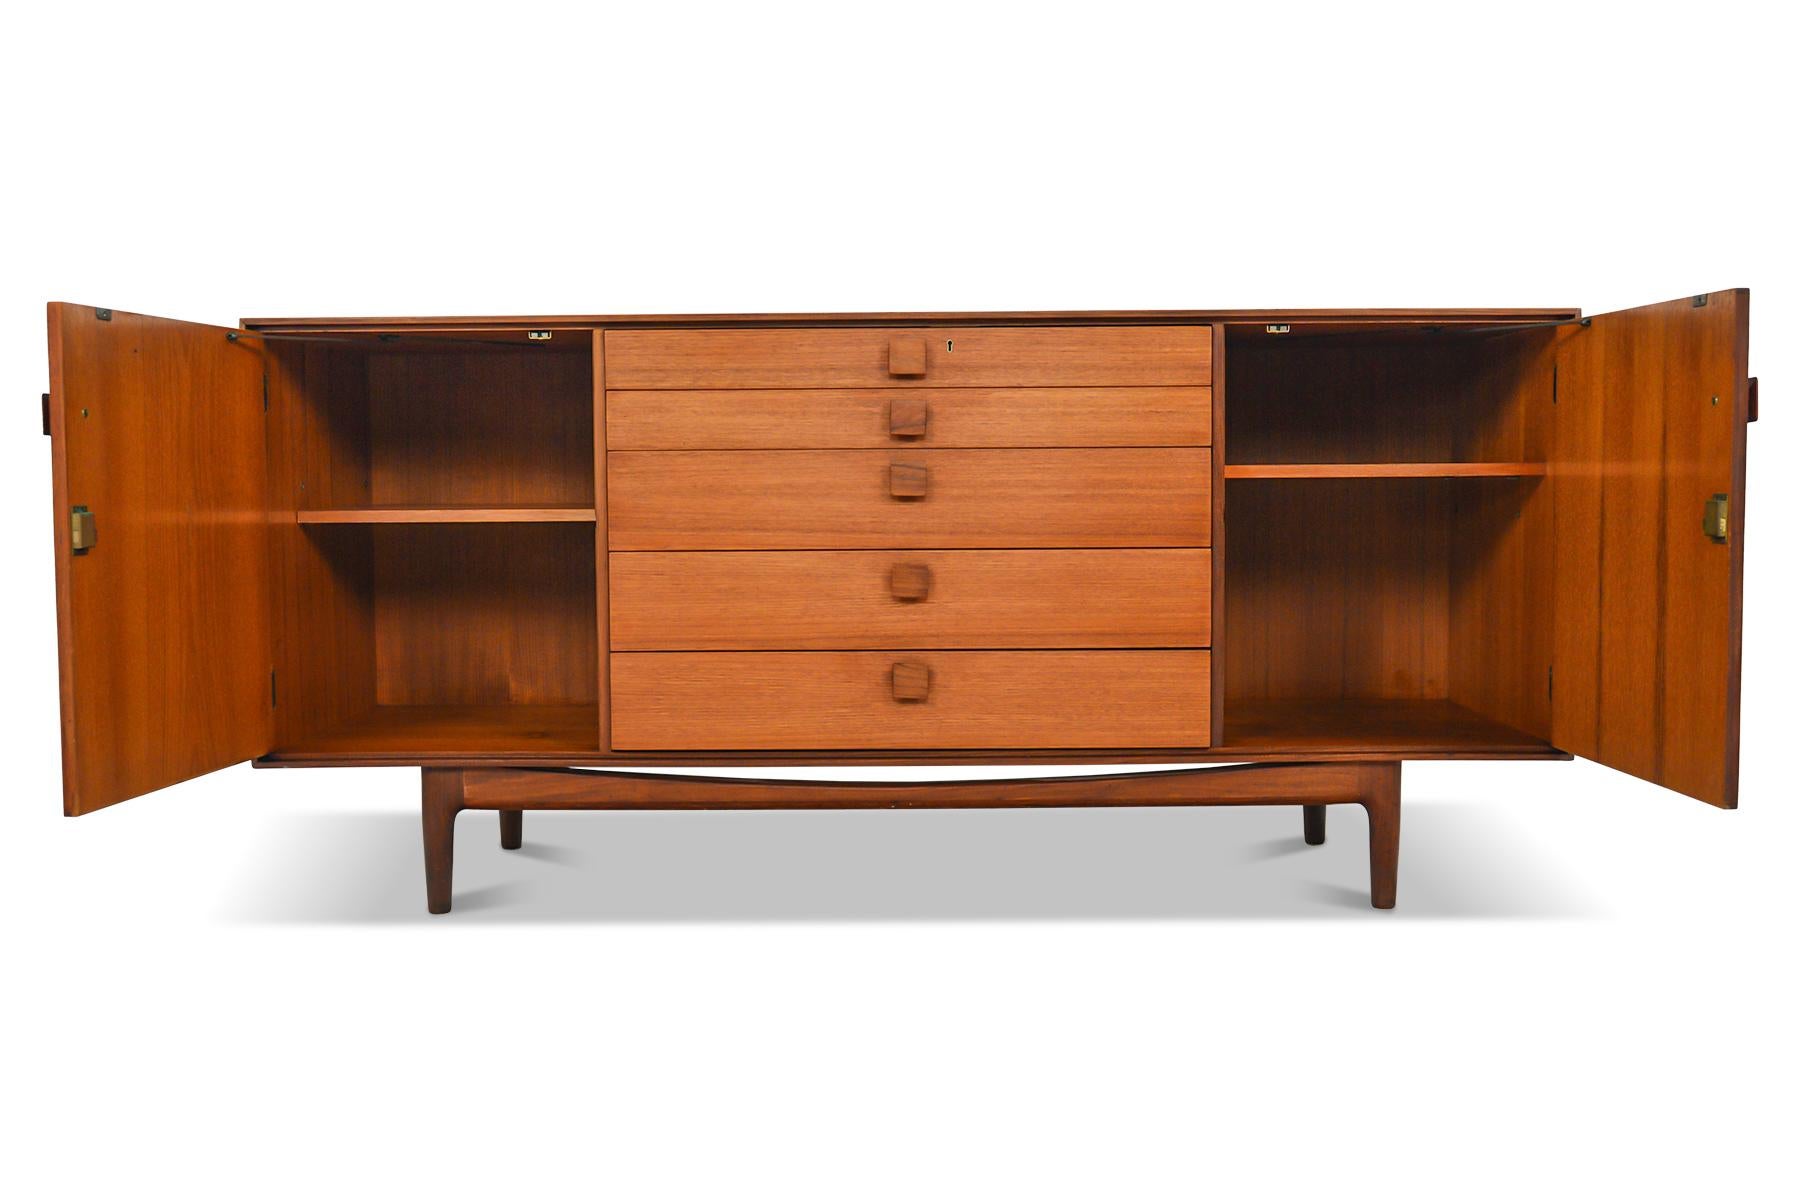 Origin: England
Designer: Ib Kofod Larsen
Manufacturer: G Plan
Era: 1961
Materials: Teak, Rosewood, Afromosia
Measurements: 66? wide x 19? deep x 30? tall

Condition: In good original condition with cosmetic wear (will be addressed in